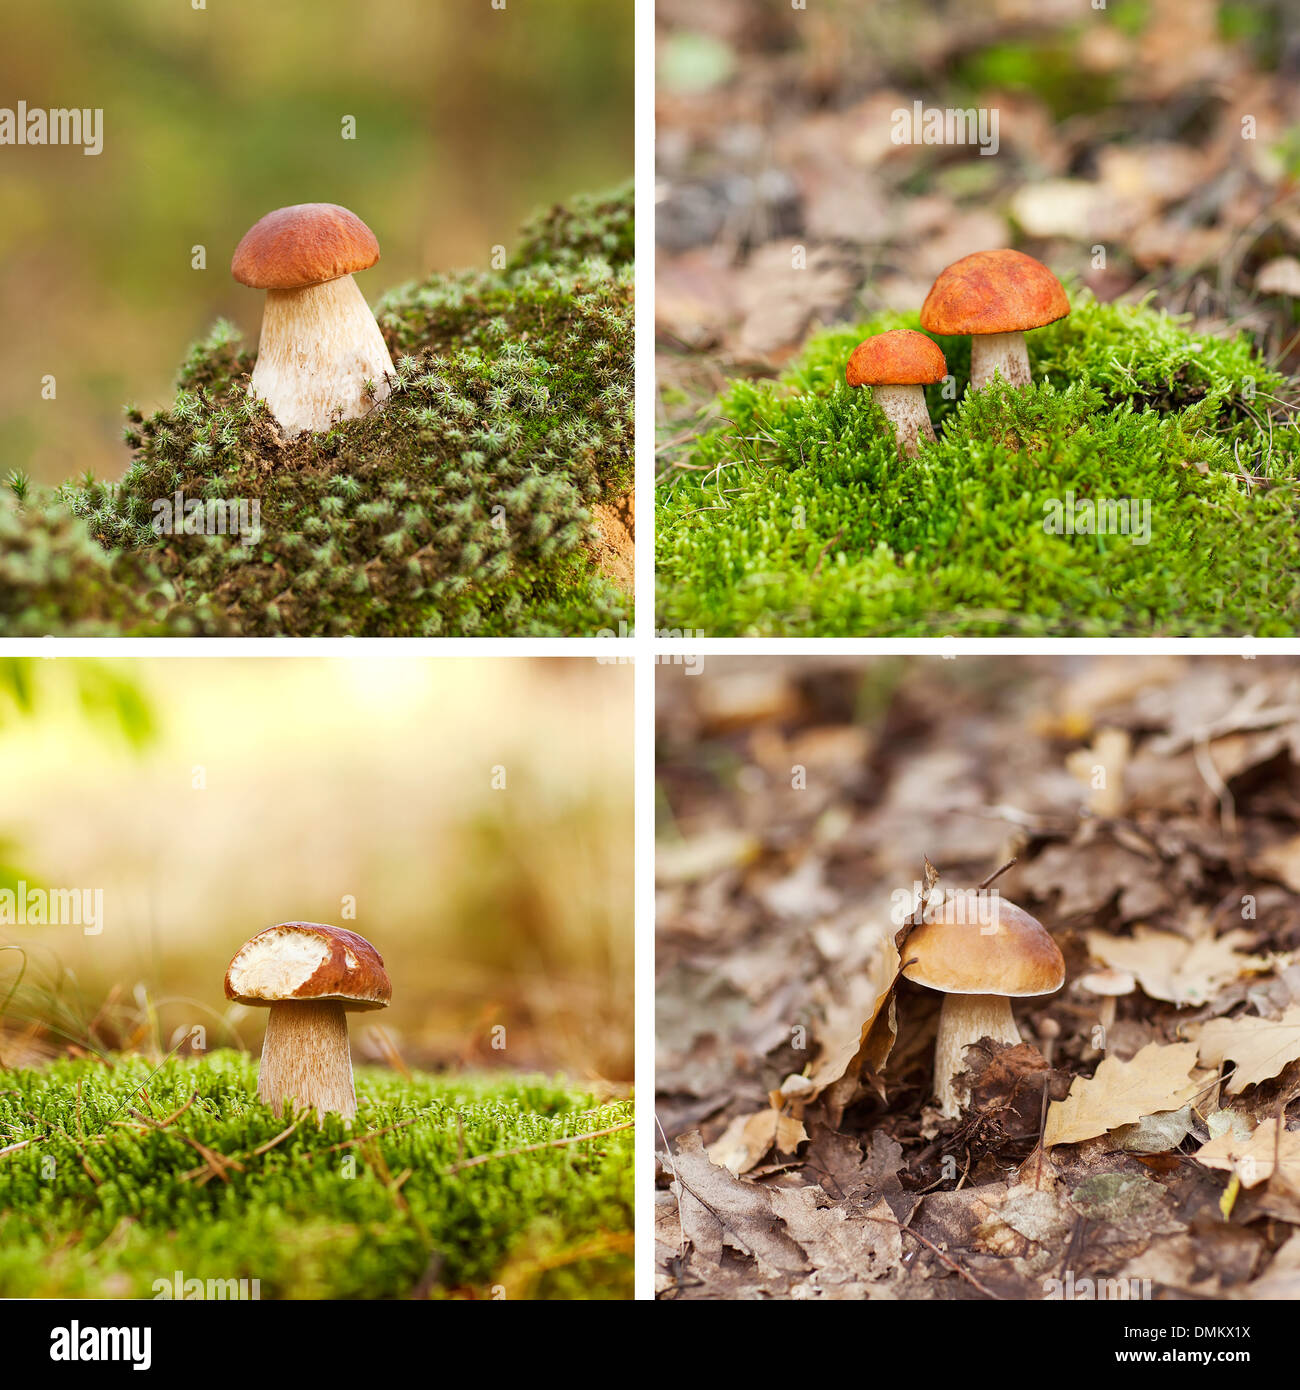 Mushrooms in the moss. Colllage. Stock Photo